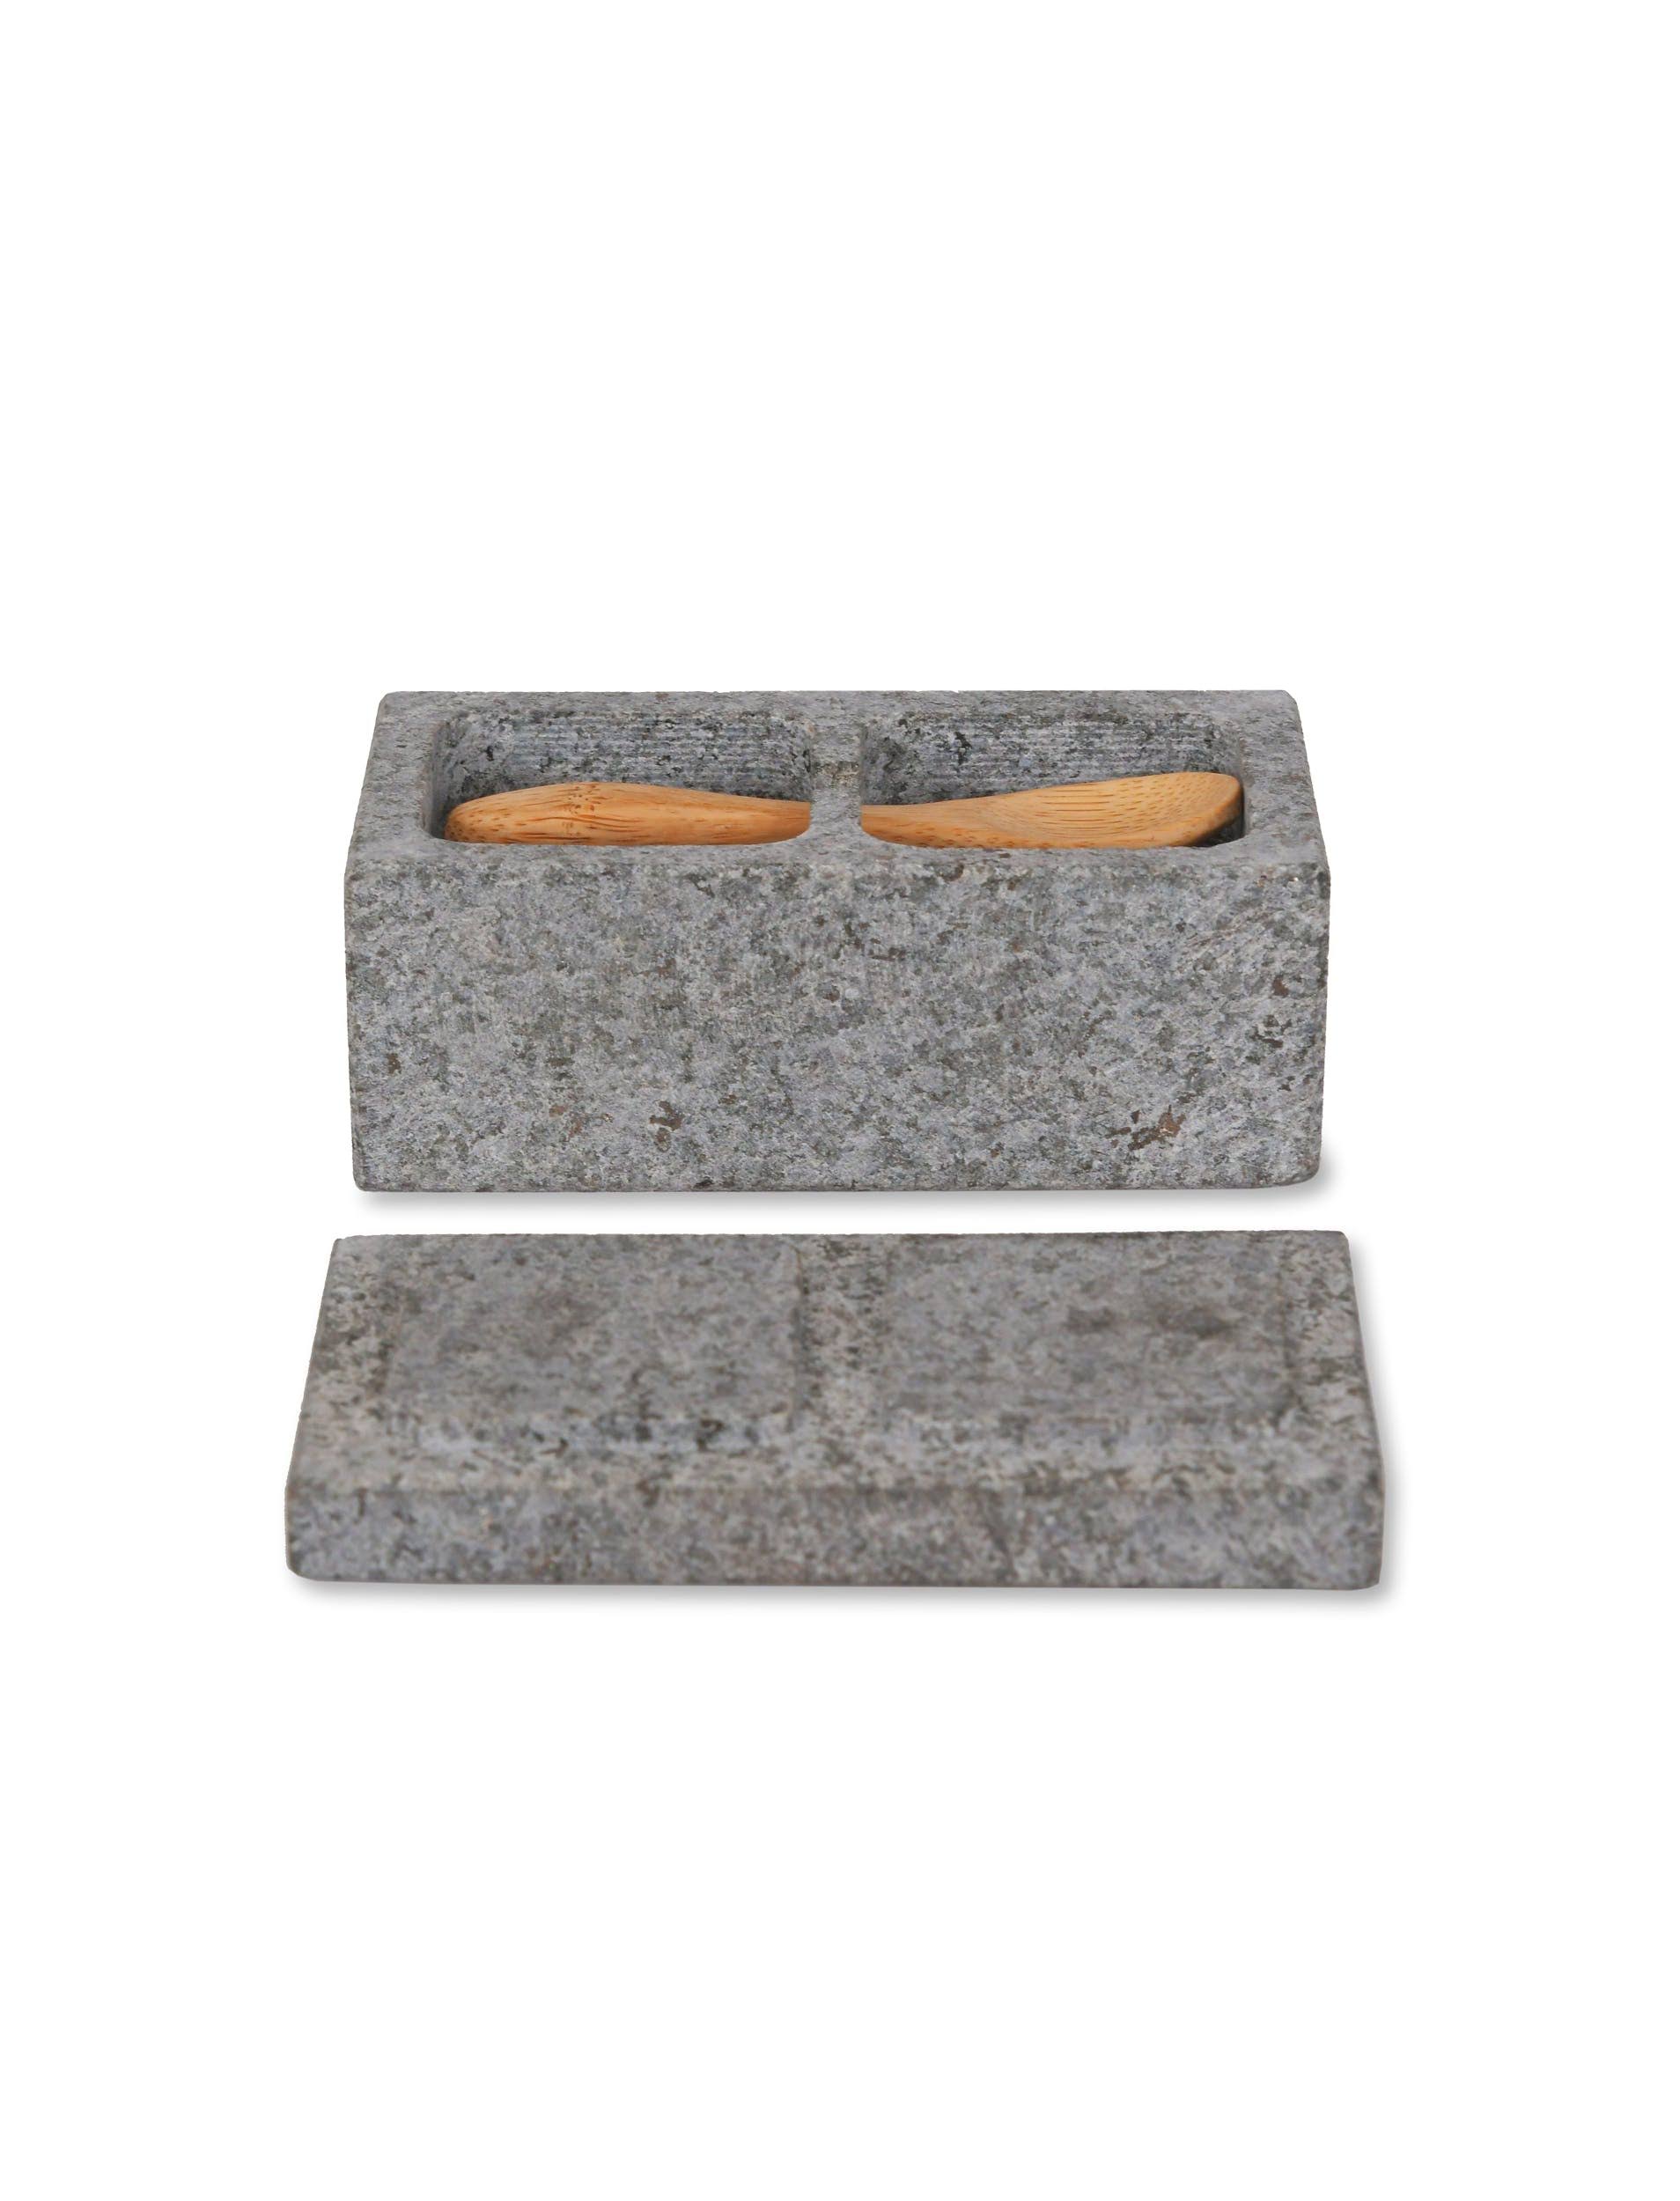 Garden Trading Salt and Pepper Pinch Pot Granite with Bamboo Spoon